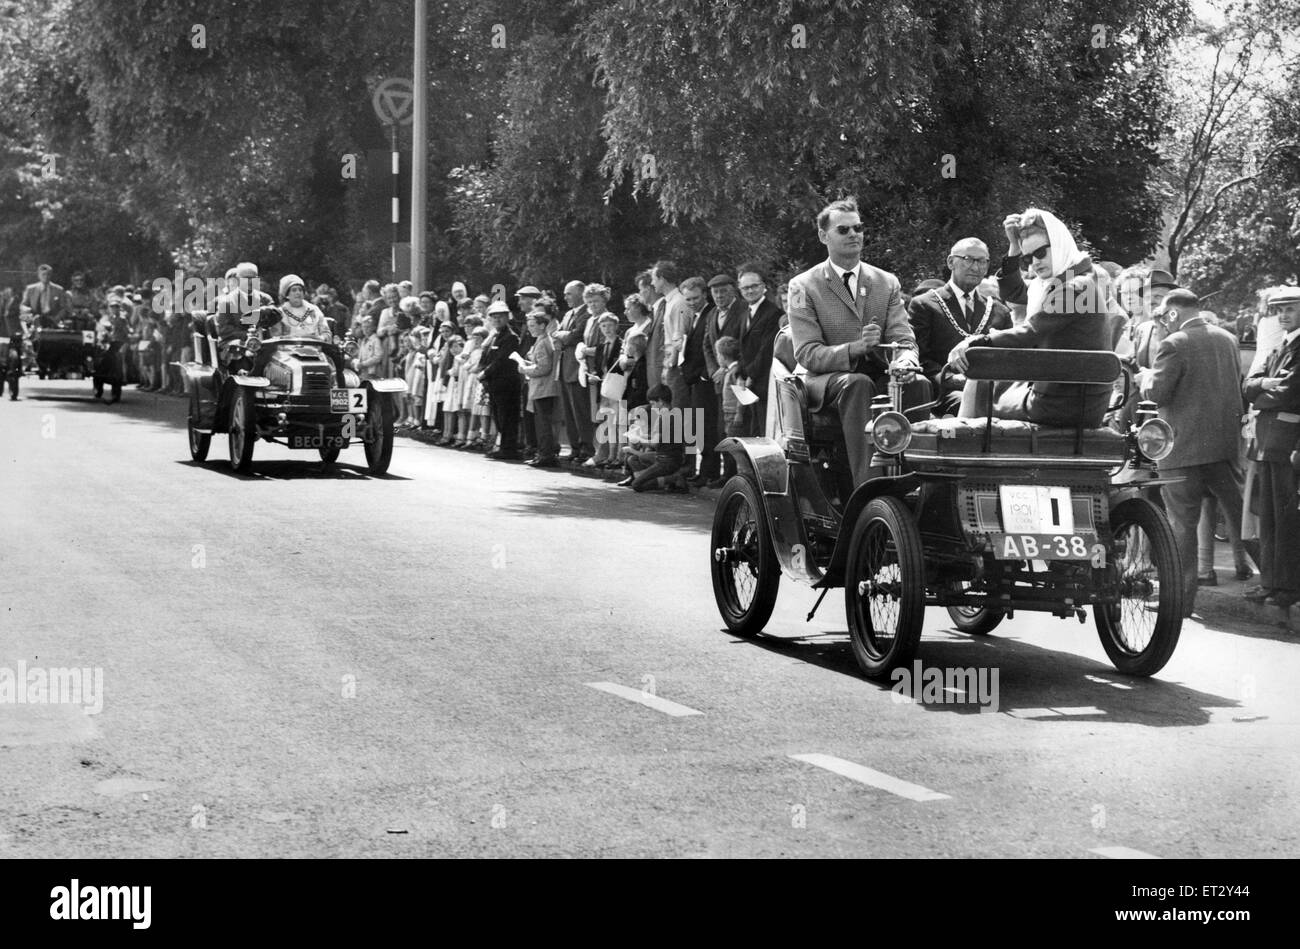 All 19 Veteran Cars due to take part in Saturdays veteran car pageant and rally, organised by the Middlesbrough Accident Prevention Council, arrive safely back in Middlesbrough afer a 33 mile round trip to Saltburn. Crowds line the route at Redcar as Mayor Alderman Reg Thompson is pictured taking a ride in the oldest vehicle in the parade, a 1901 De Dion owned by Mr R H S Lung of Crowie, Lincolnshire, 31st July 1961. Stock Photo